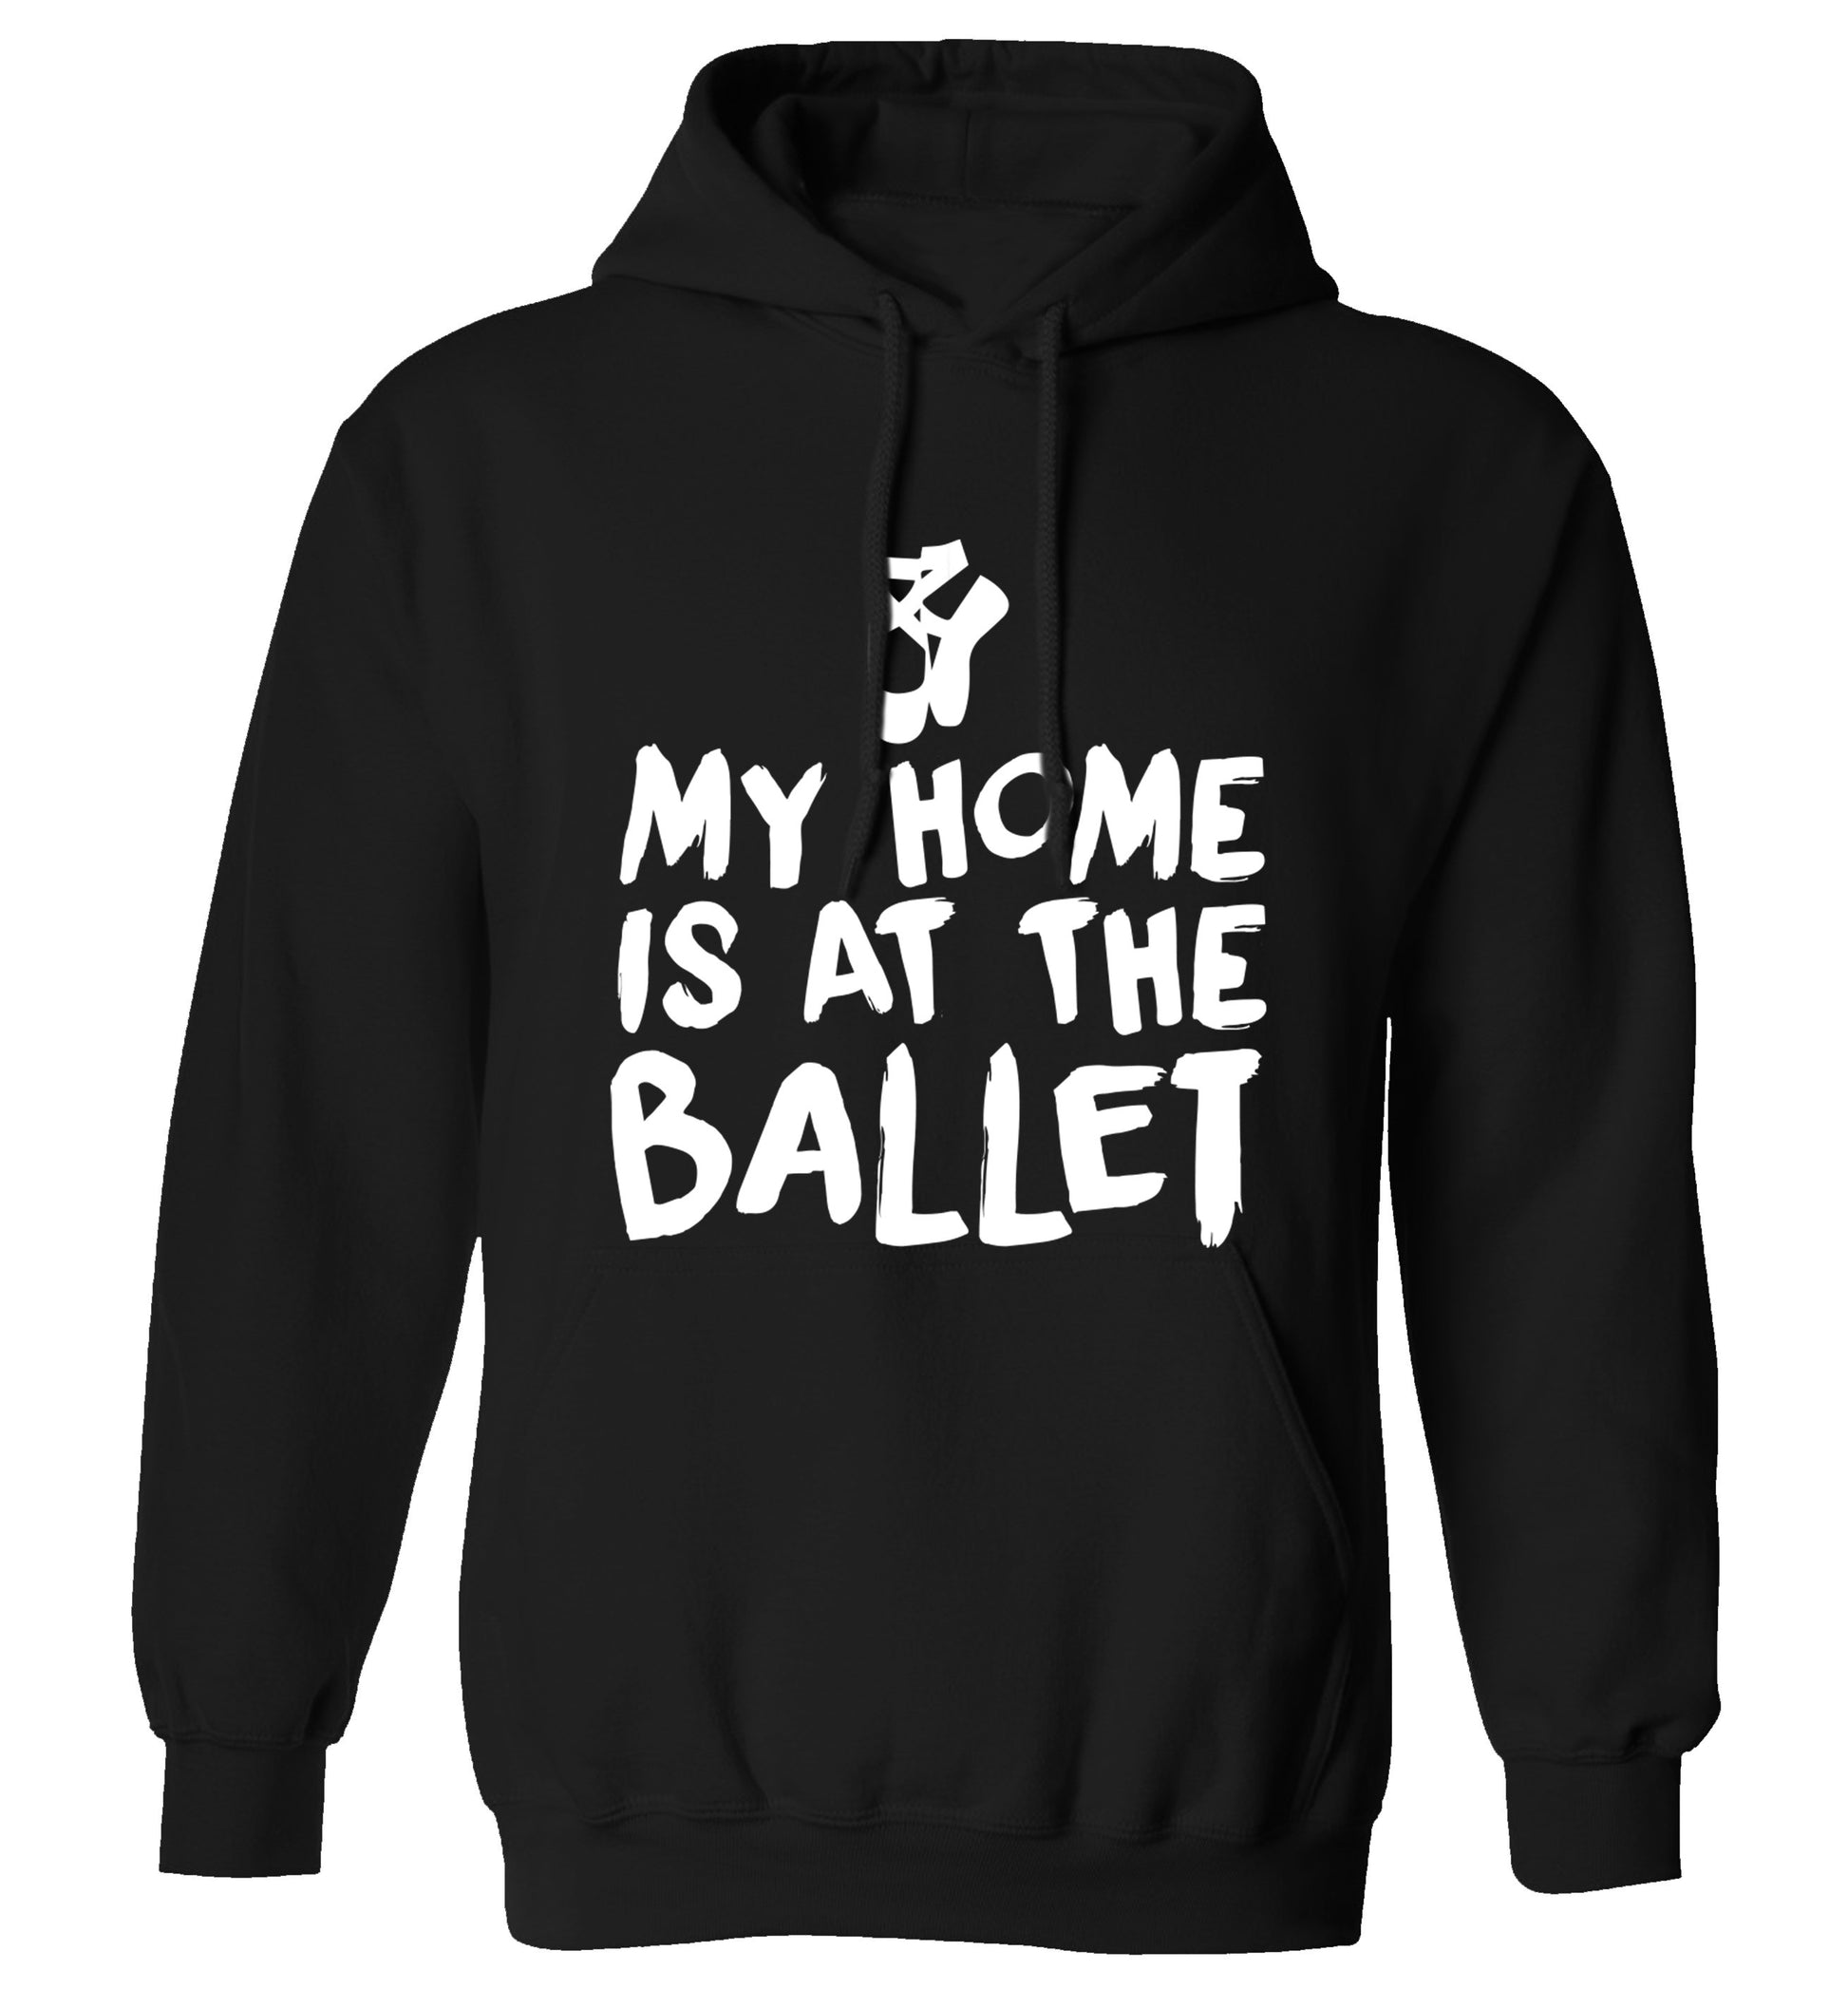 My home is at the ballet adults unisex black hoodie 2XL